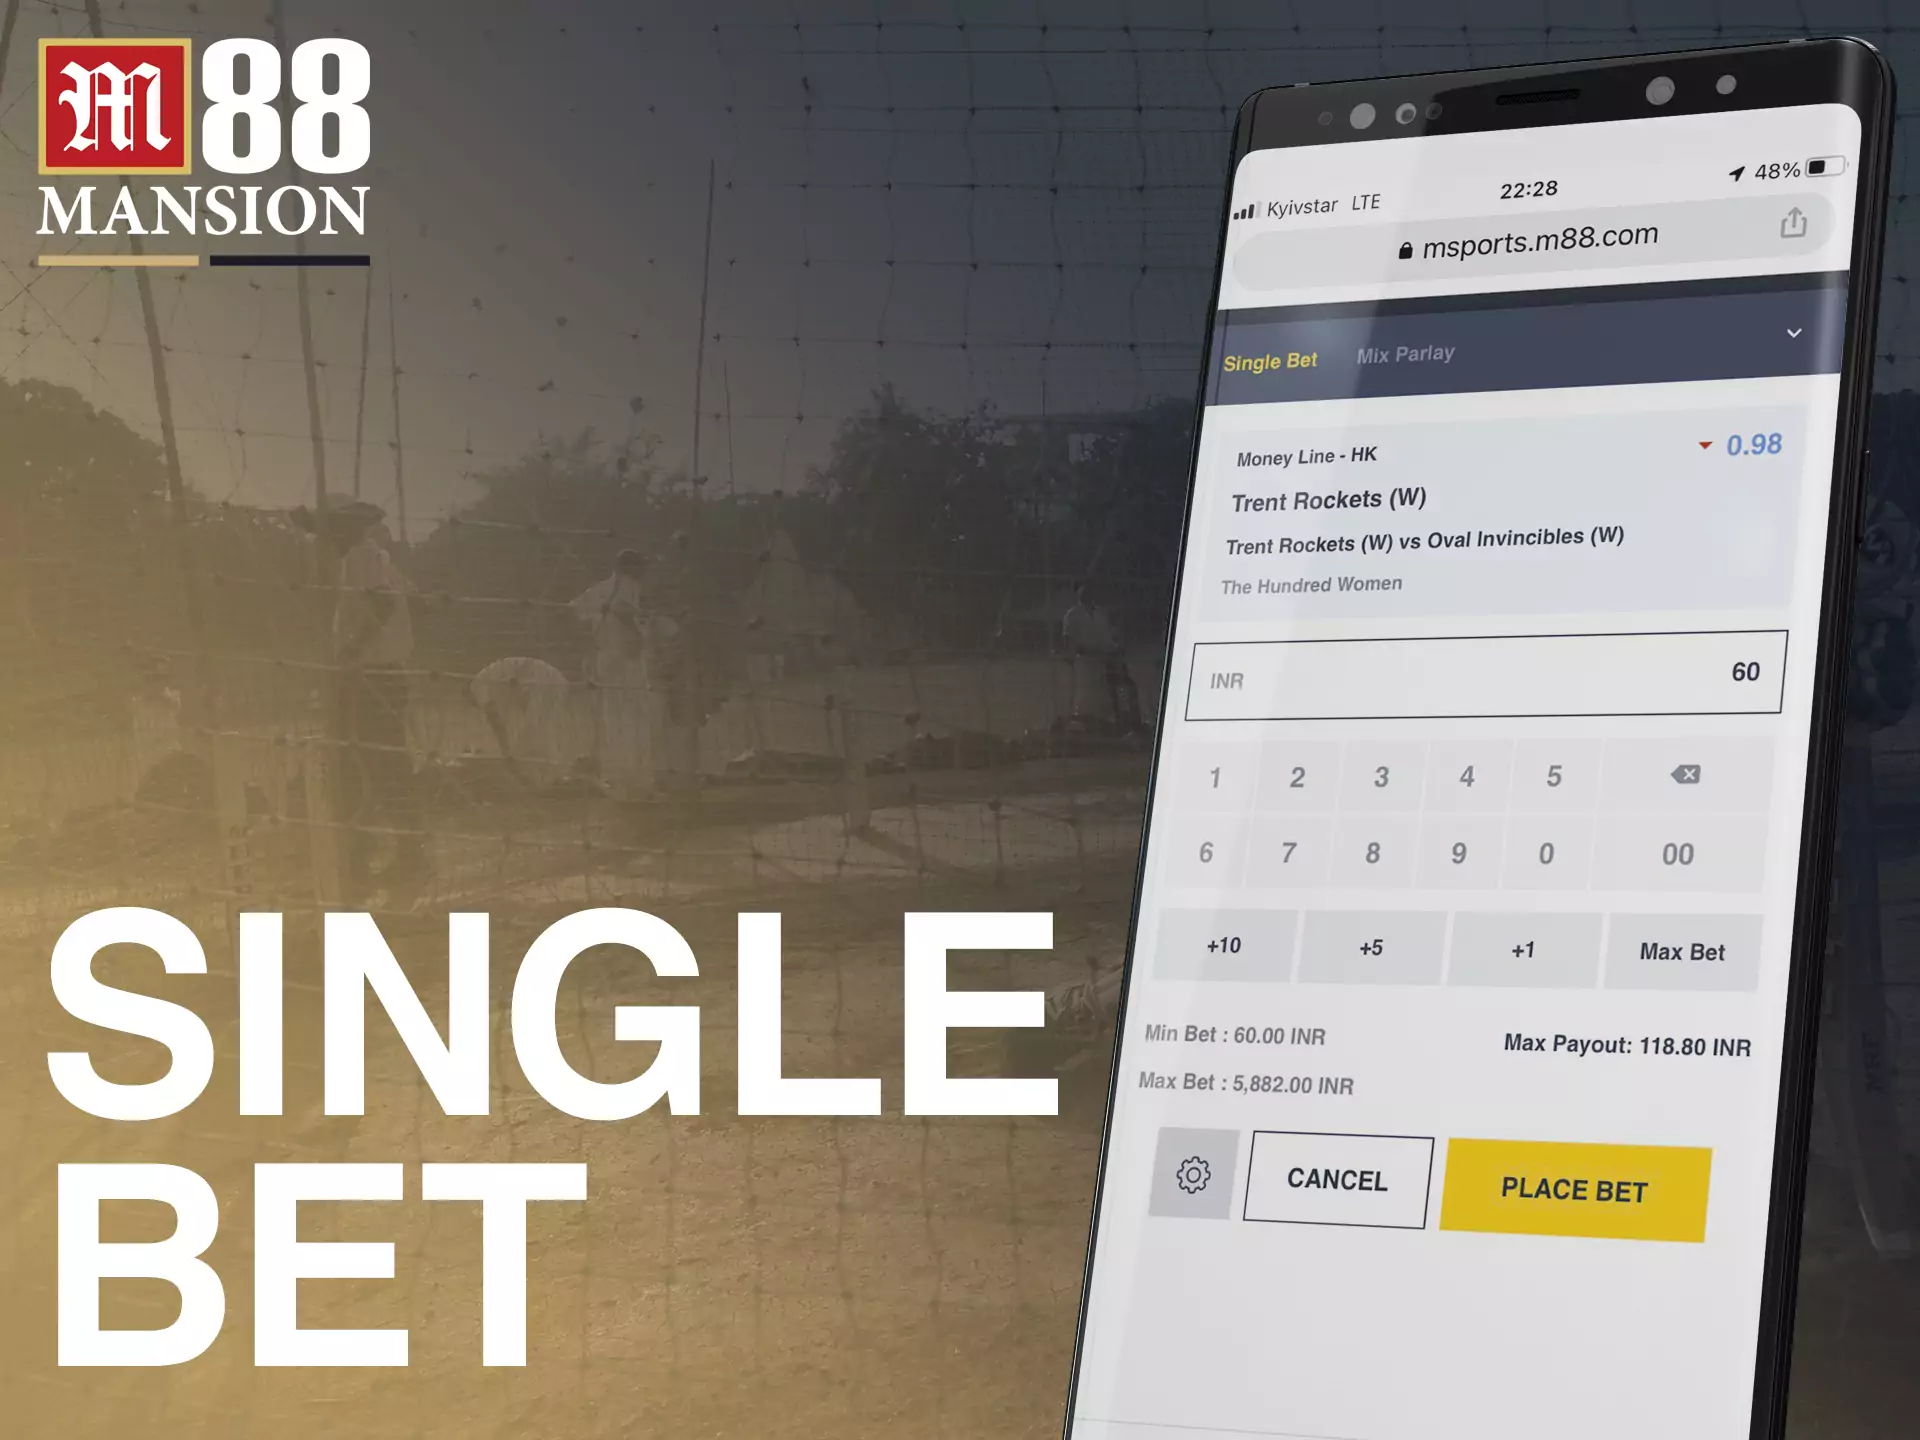 You can make a single bet while you are betting on the M88 website.